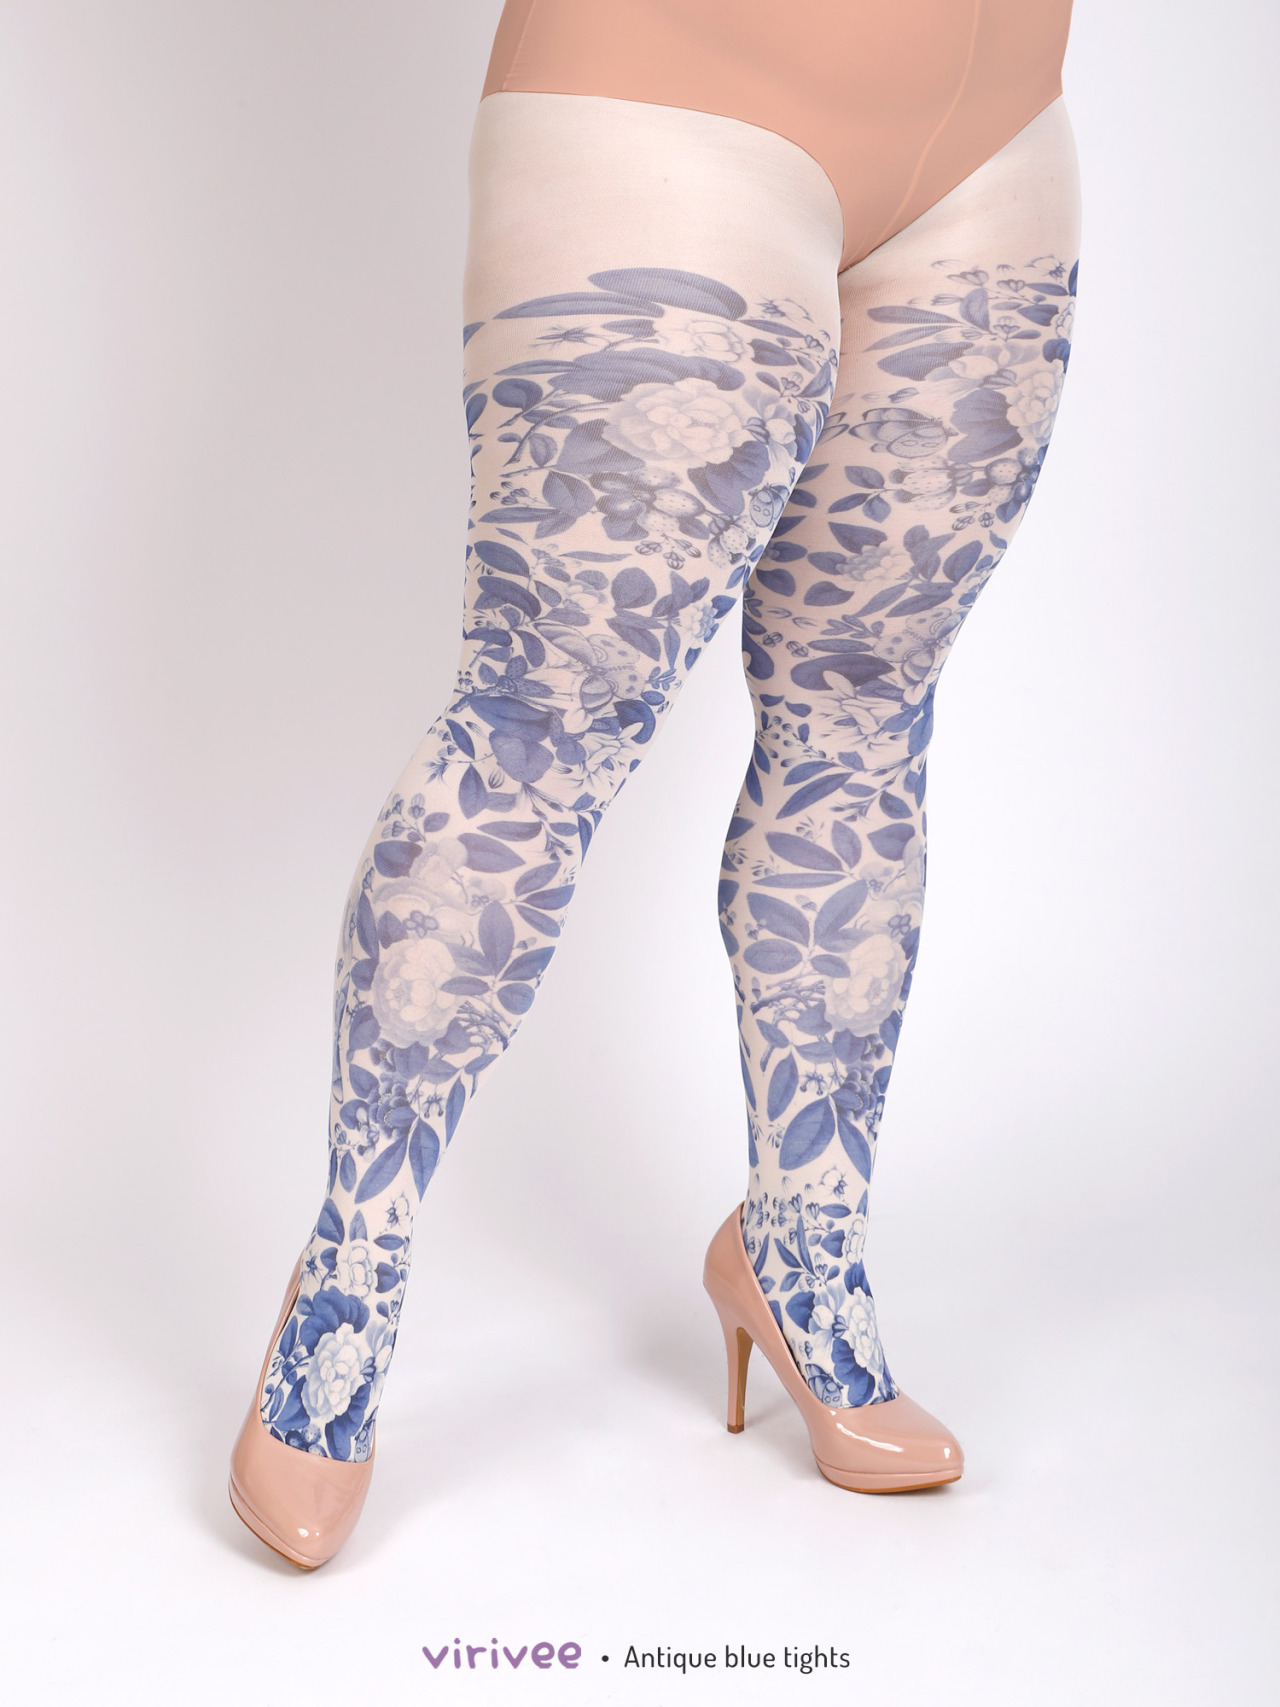 Antique blue floral tights  Blue floral print with on ivory SEMI-OPAQUE tights.
The material is super soft, fits nicely thanks to its comfortable stretch. 40 denier, semi-opaque, soft touch microfiber tights.
•  Unique design
• Semi-opaque tights
•...